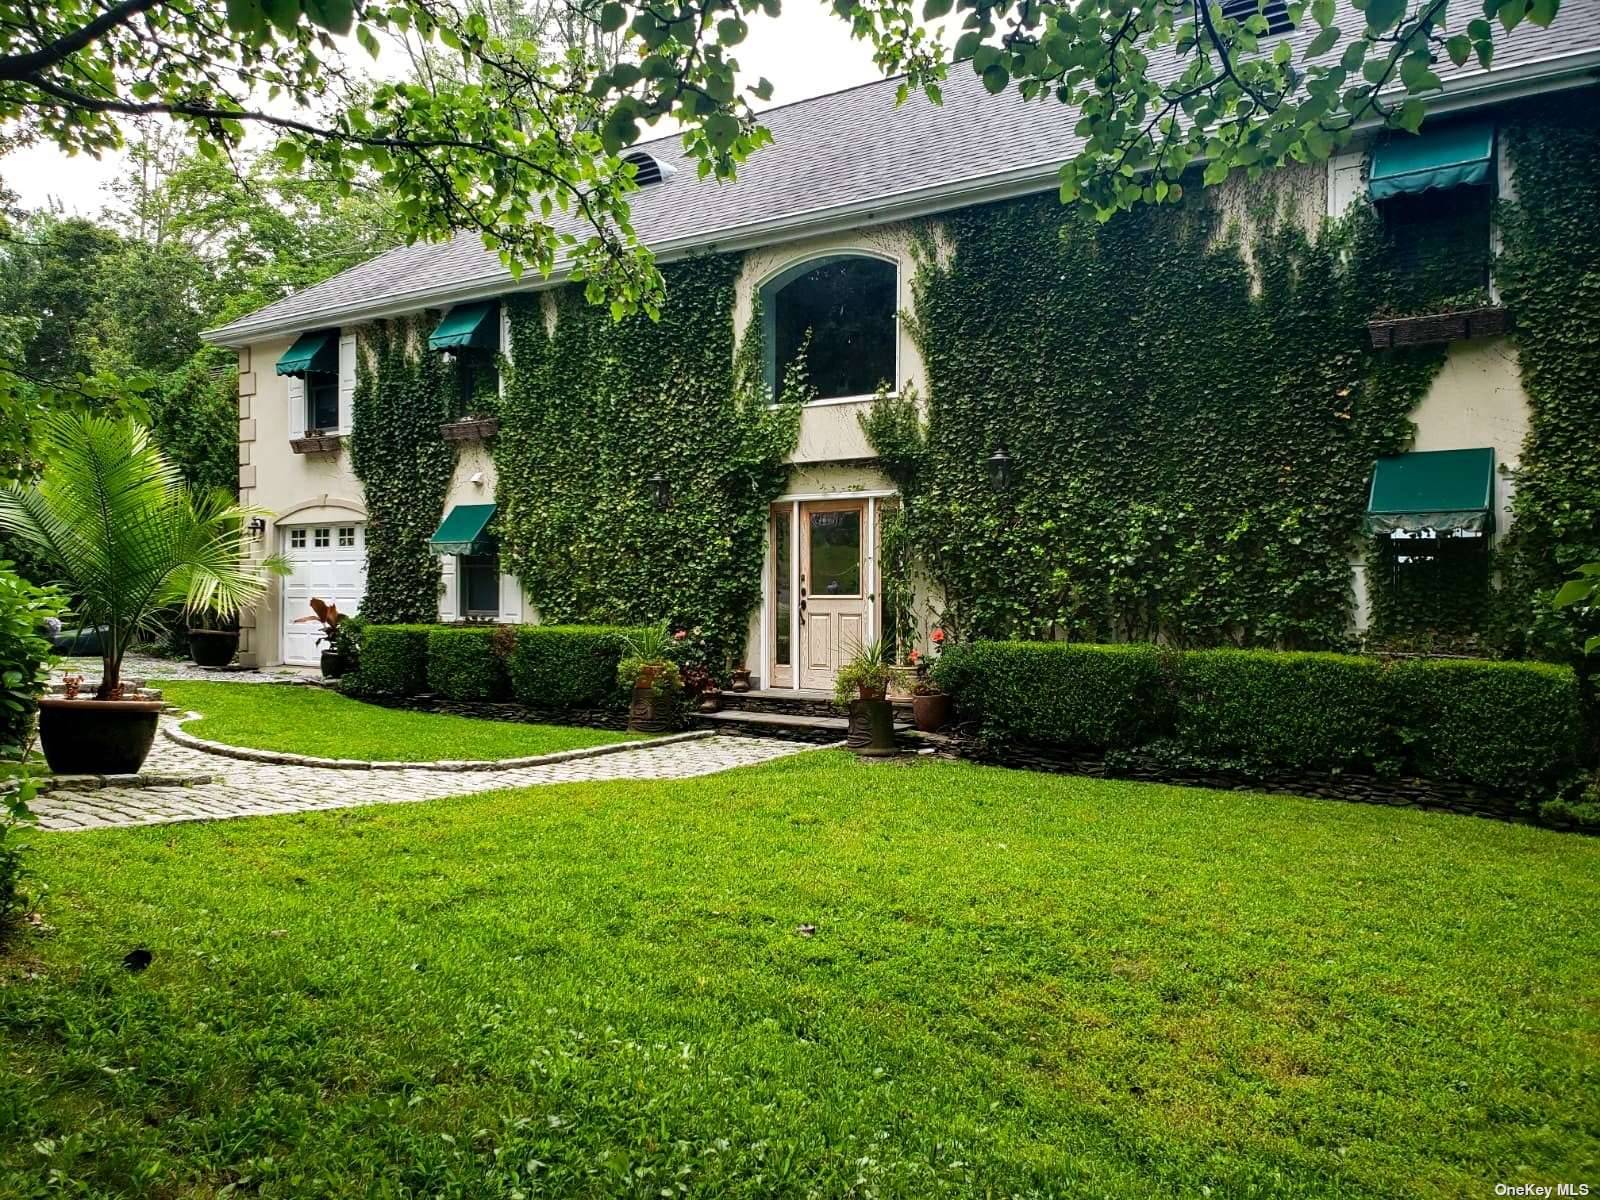 Incredible waterfront home on Centre Island, close proximity to NYC.